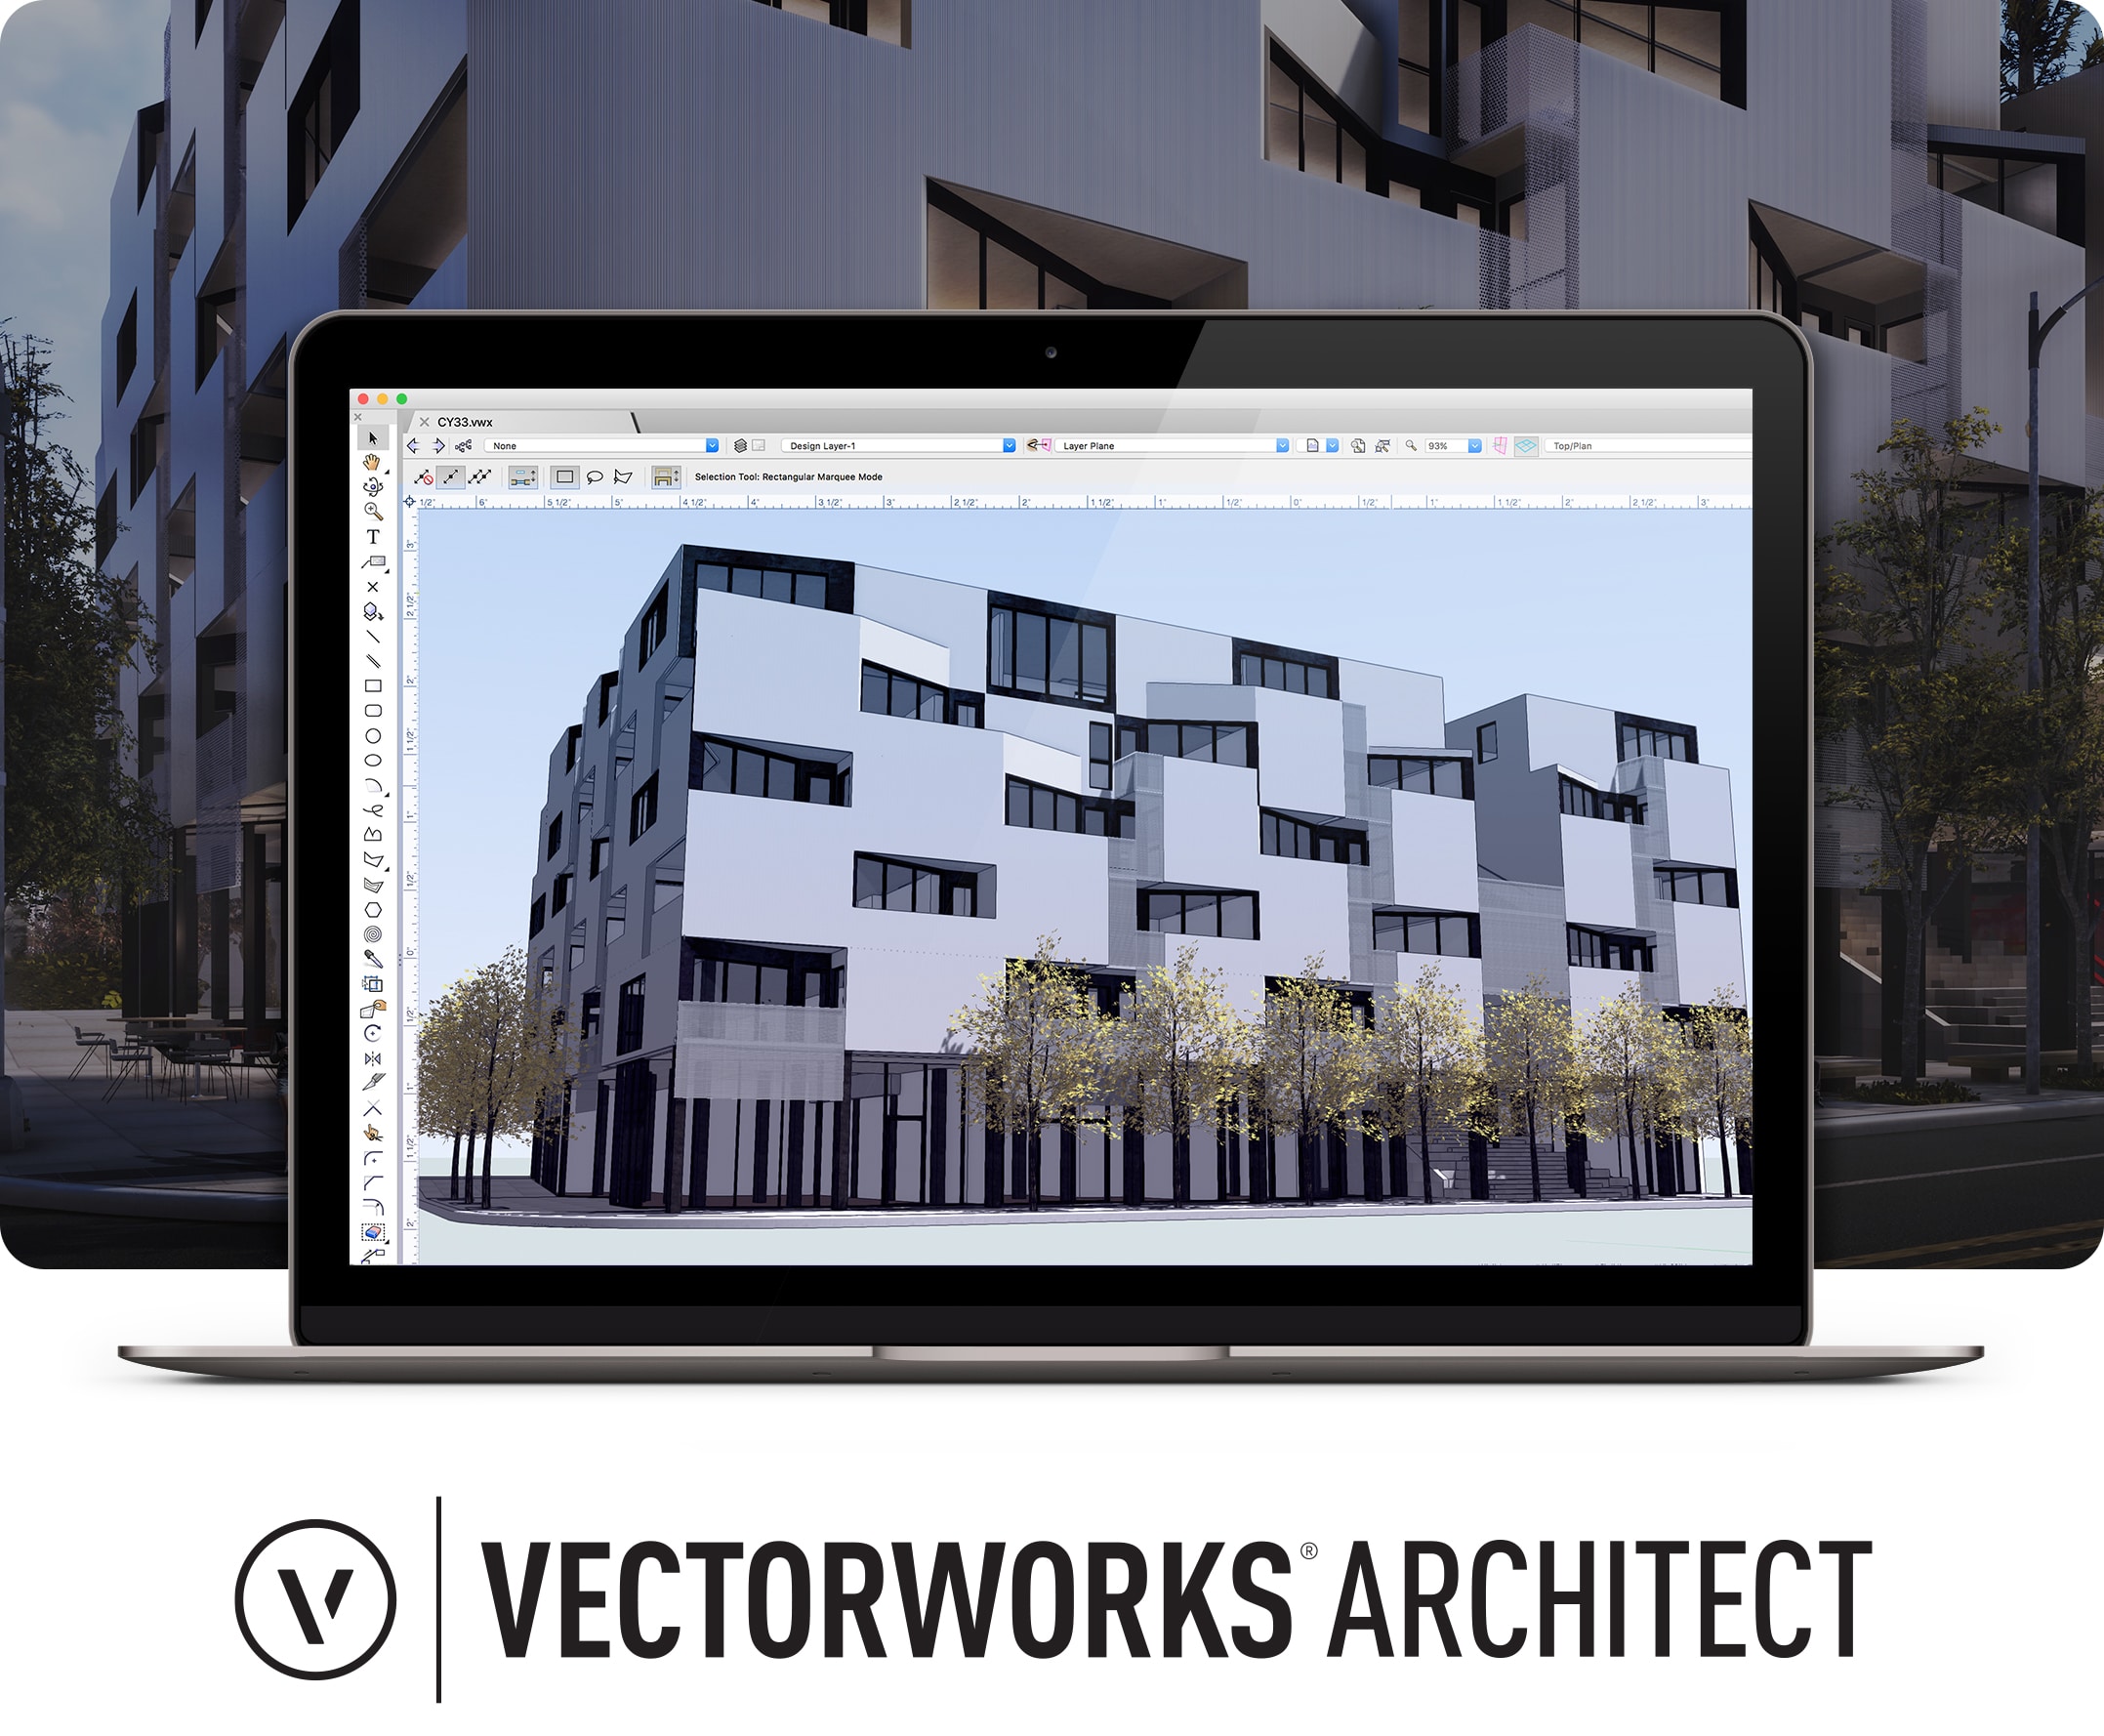 how to download old version of vectorworks